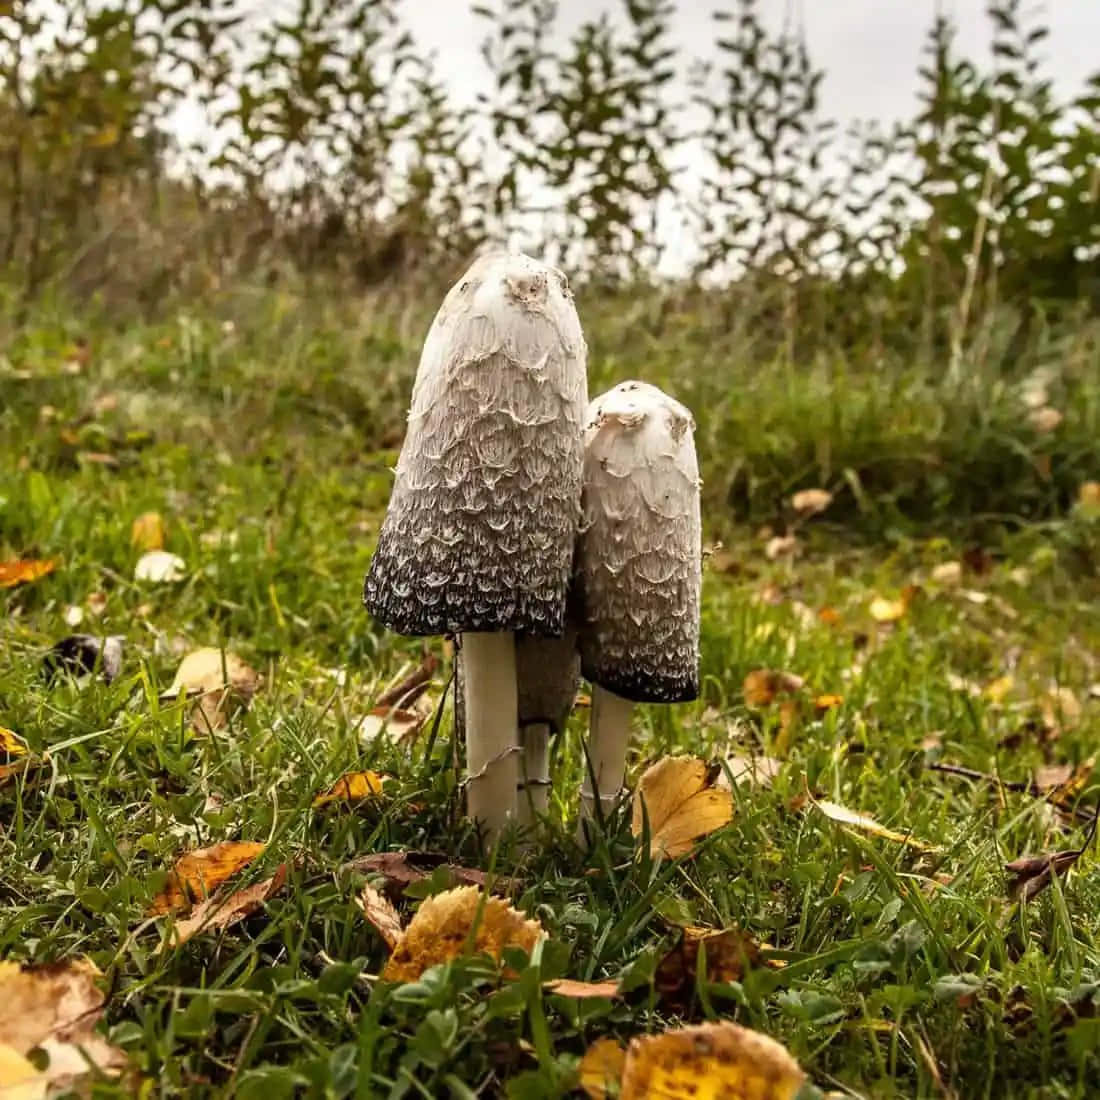 A Magical Mushroom Growing In The Wild